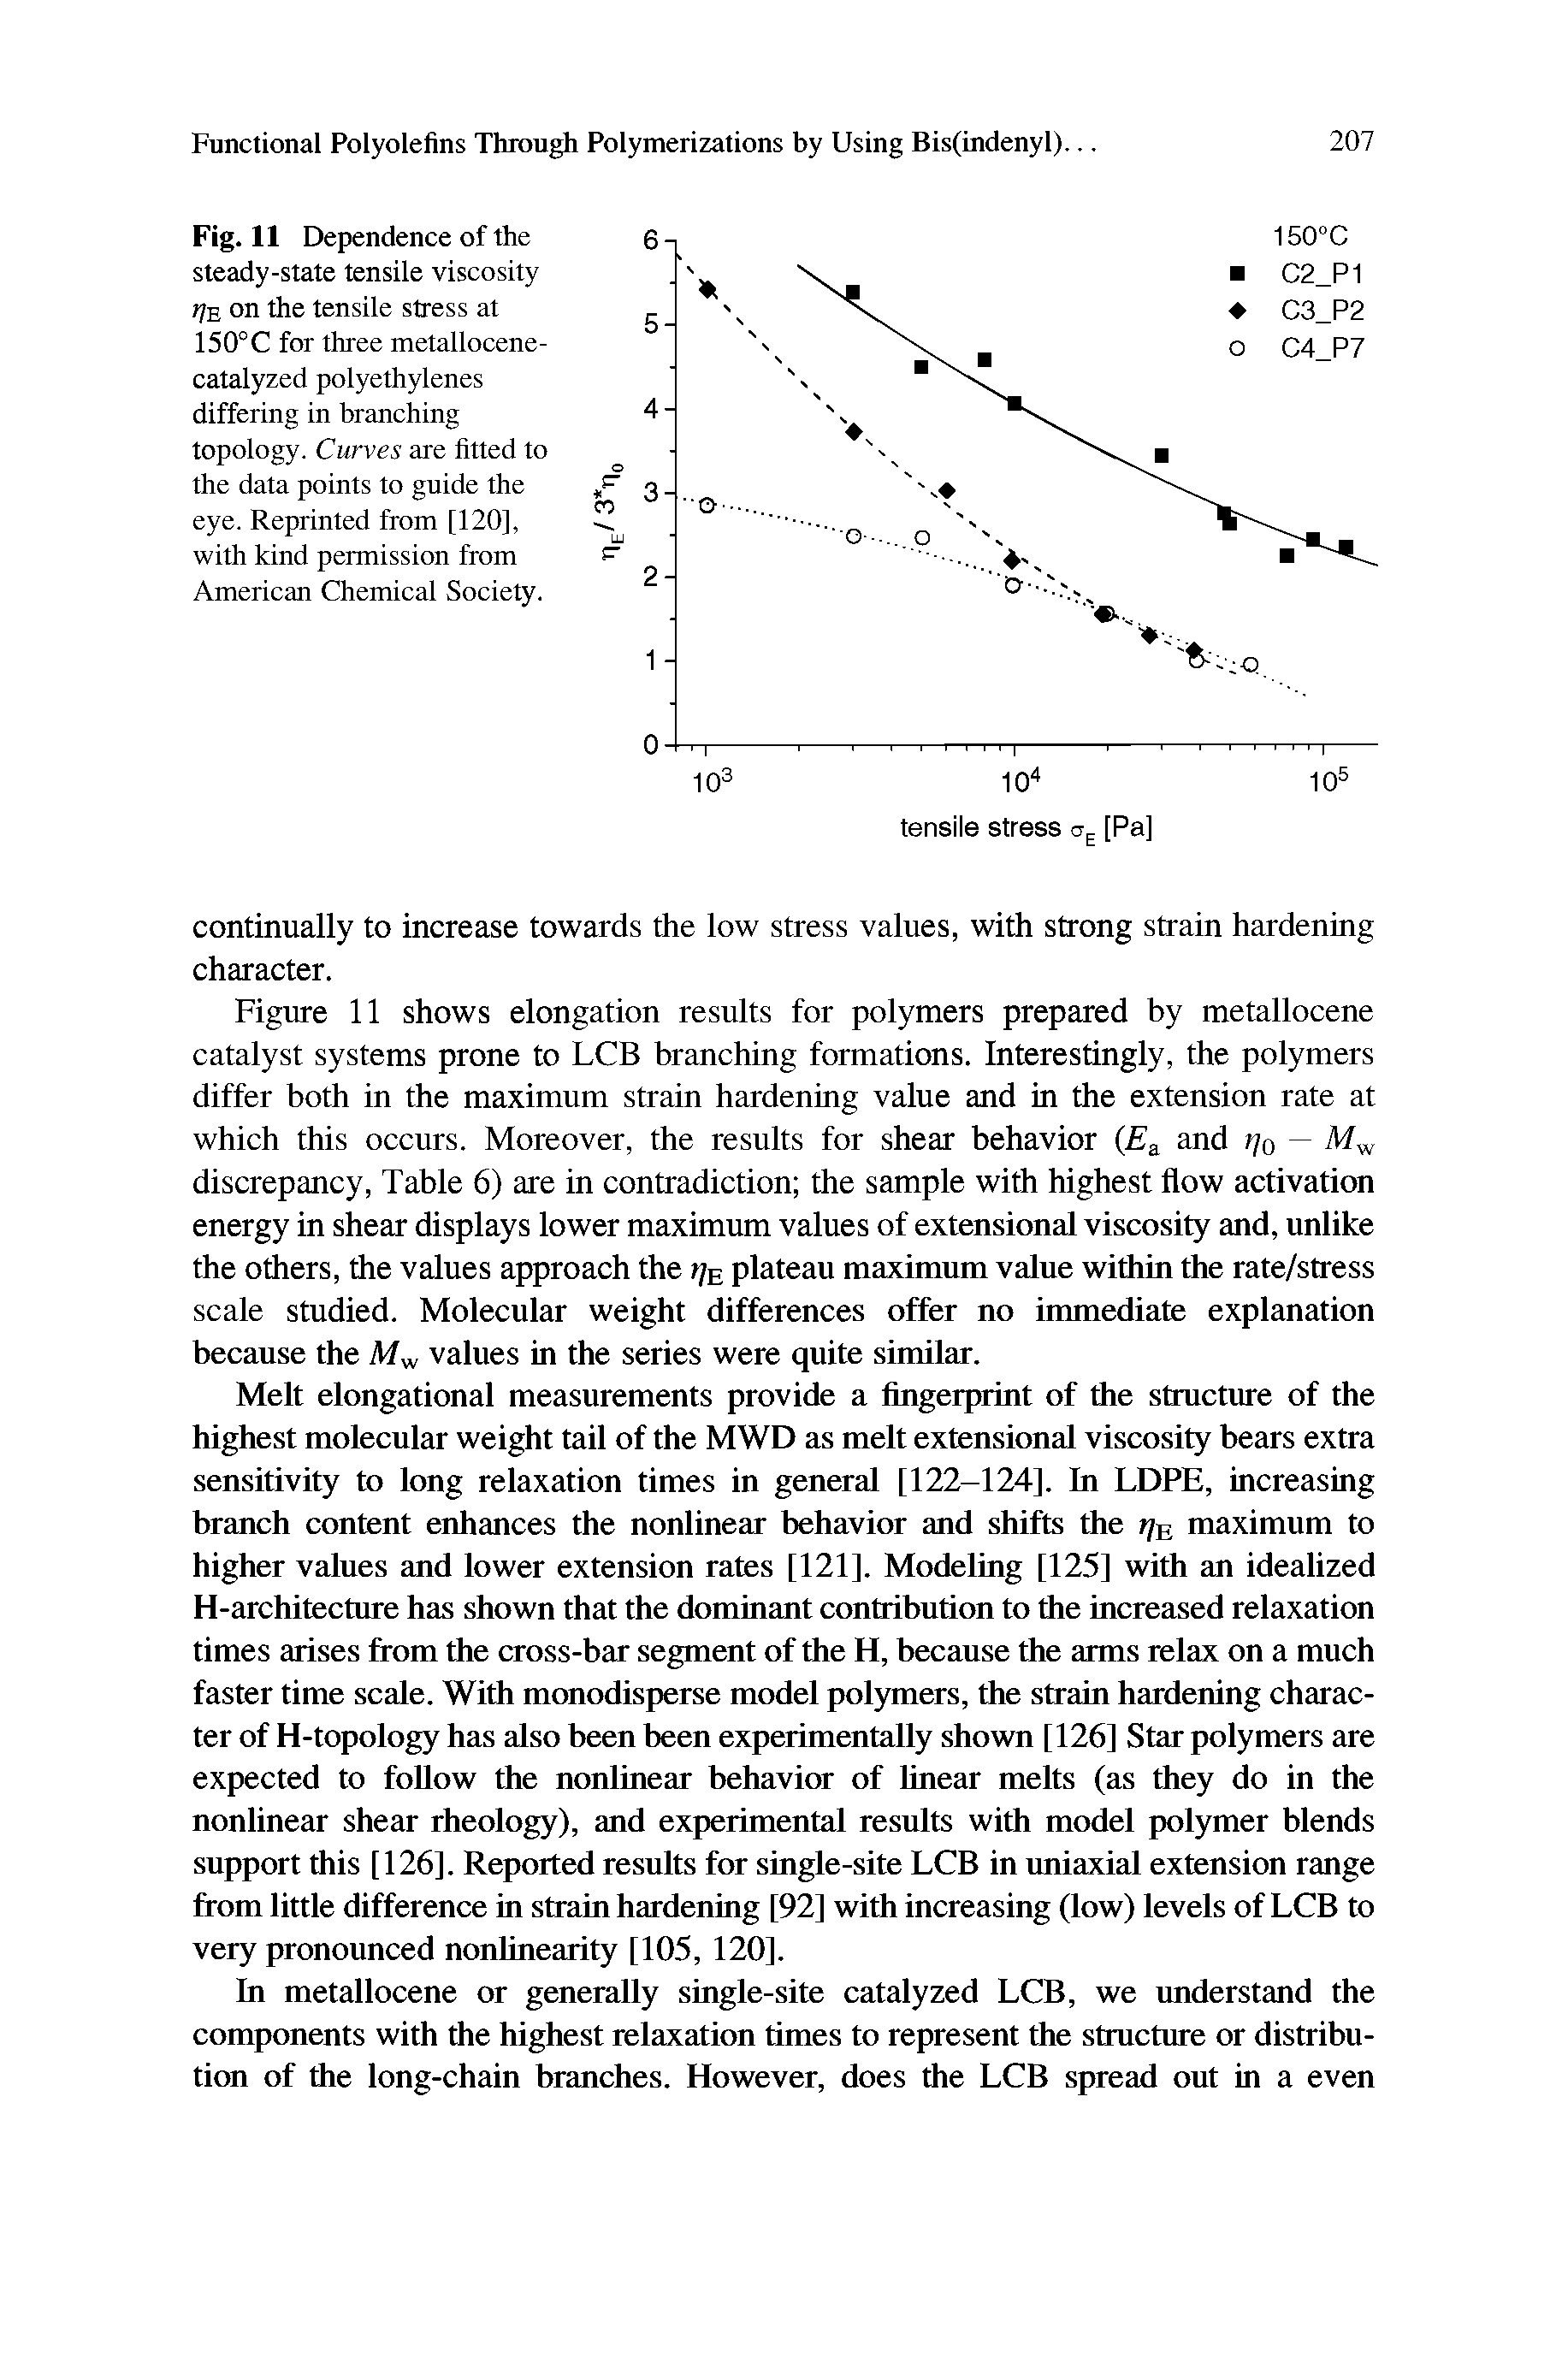 Fig. 11 Dependence of the steady-state tensile viscosity riE on the tensile stress at 150°C for three metallocene-catalyzed polyethylenes differing in branching topology. Curves are fitted to the data points to guide the eye. Reprinted from [120], with kind permission from American Chemical Society.